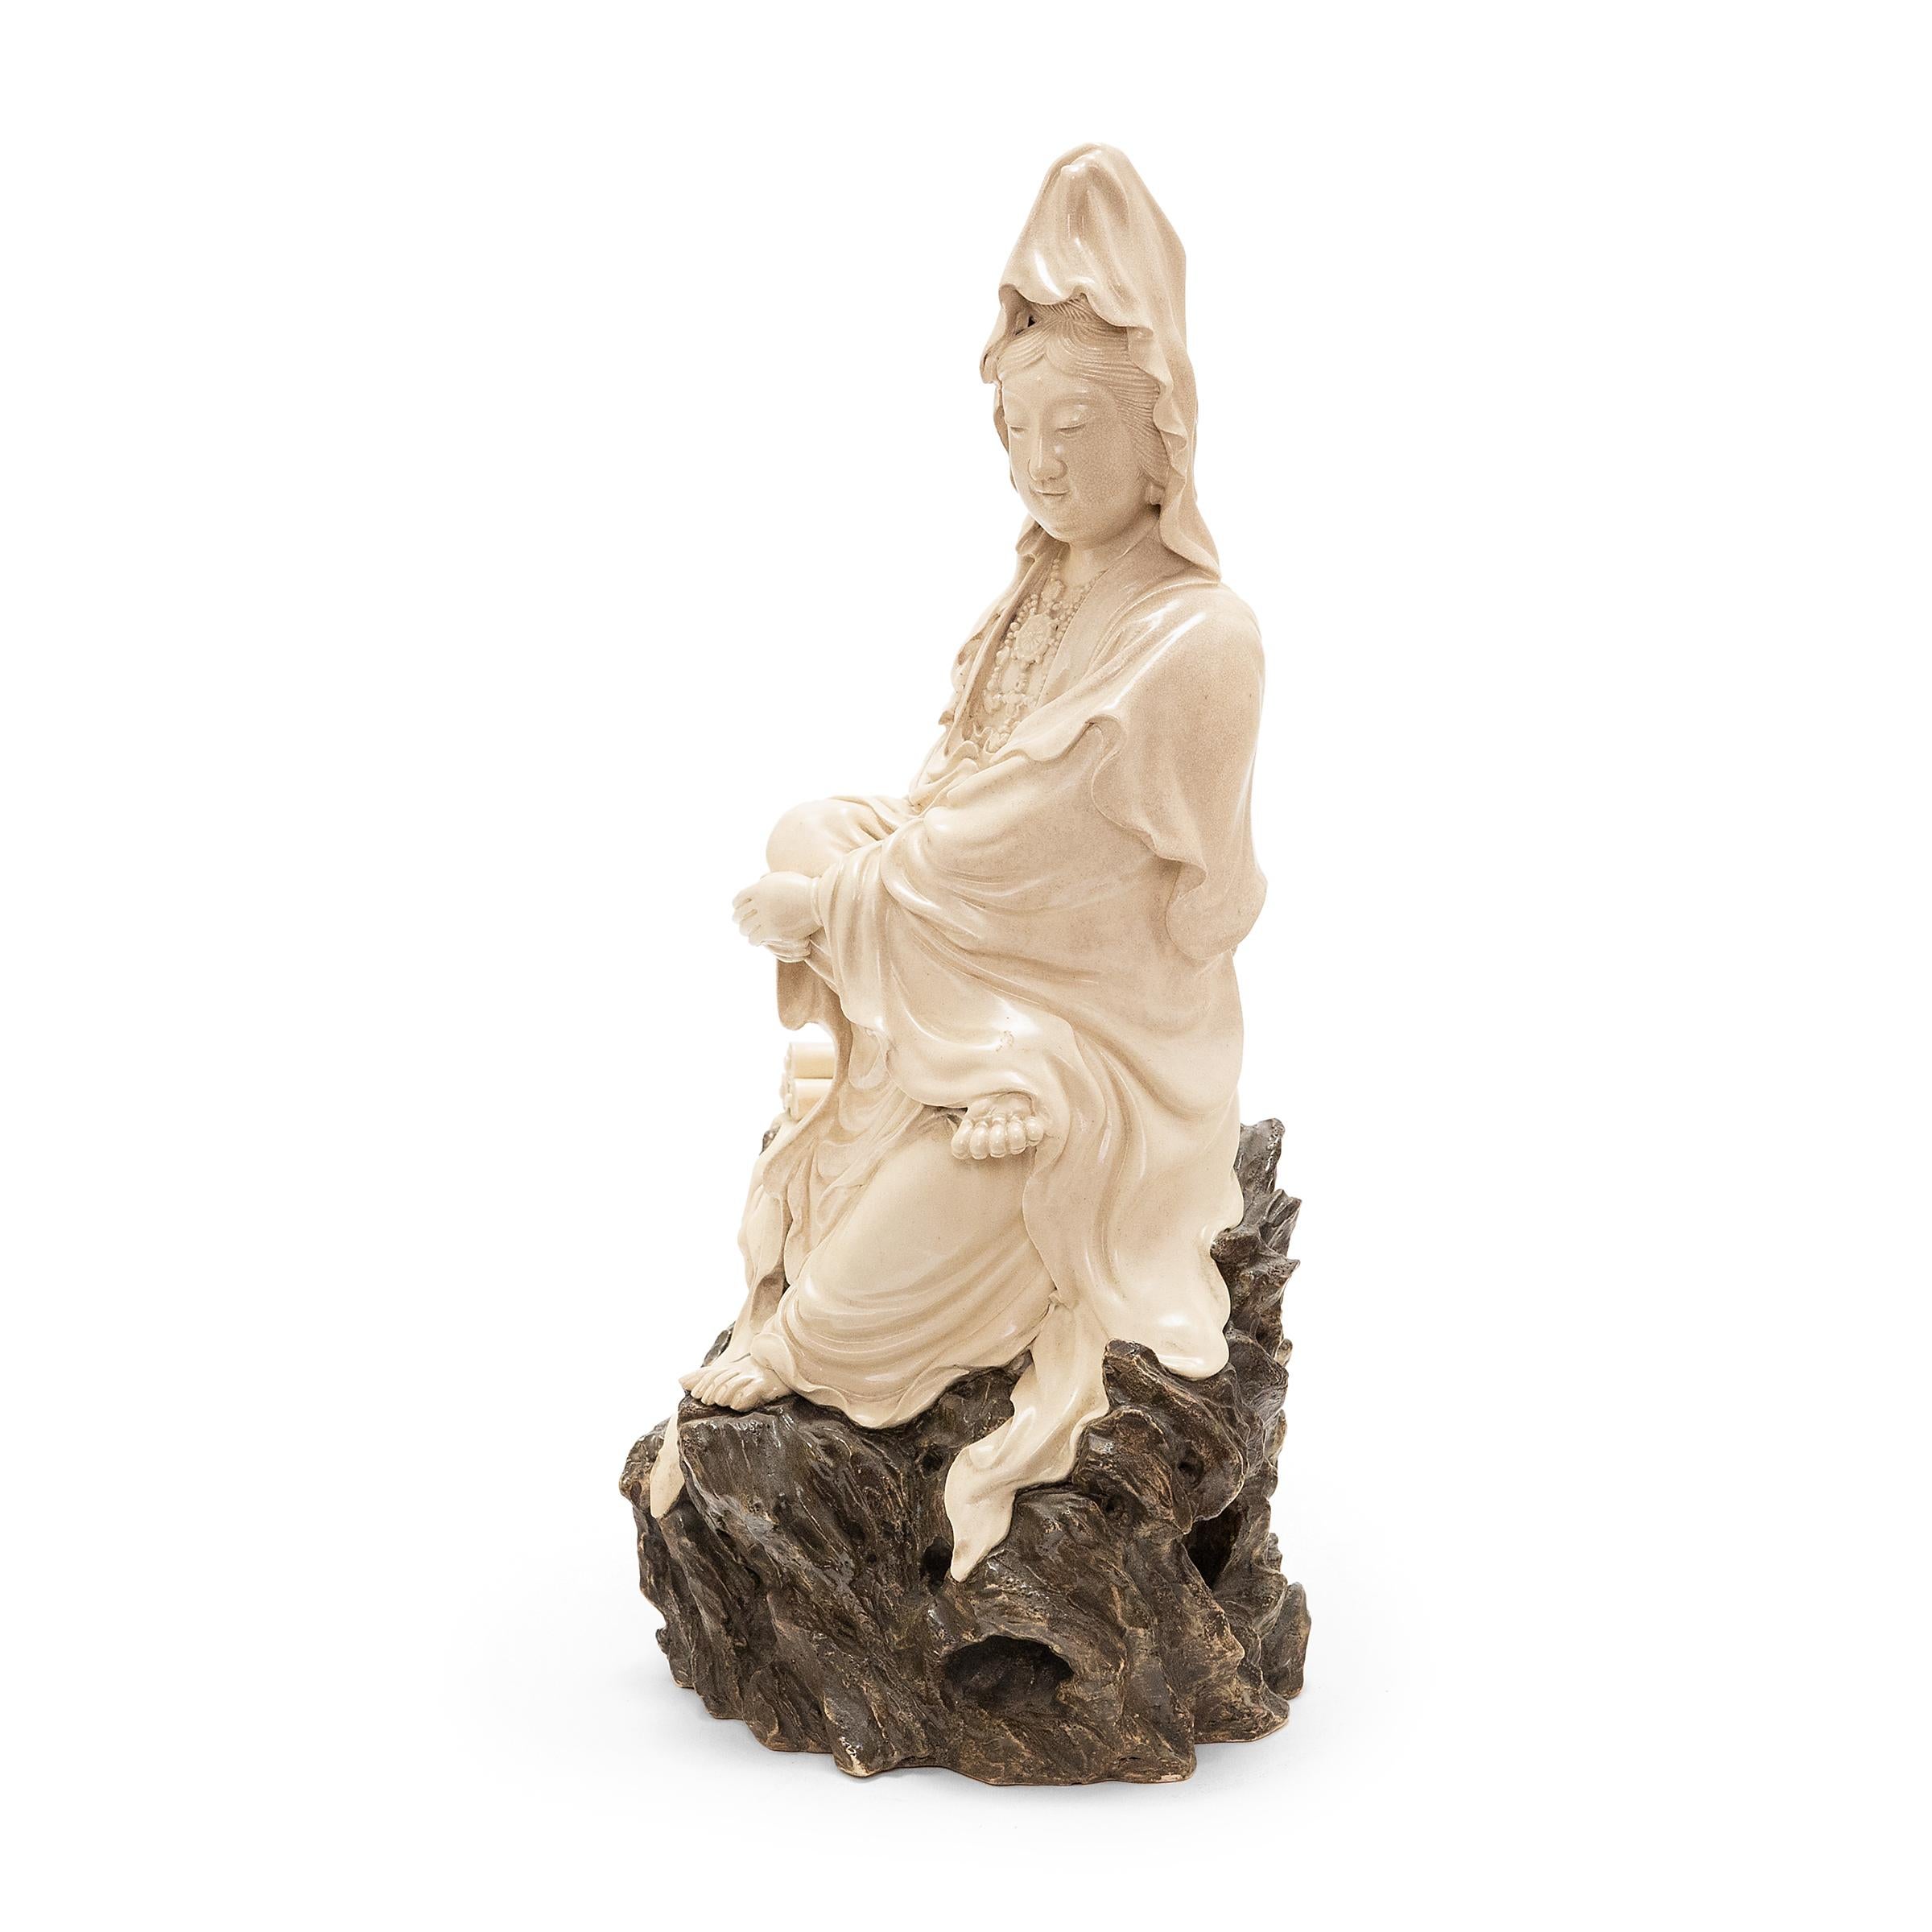 As the embodiment of compassion, Guanyin is the most beloved enlightened being in China. Known as the Goddess of Mercy, she is the female bodhisattva form taken by Avalokiteśvara in eastern Buddhism. Guanyin can take many forms depending on the